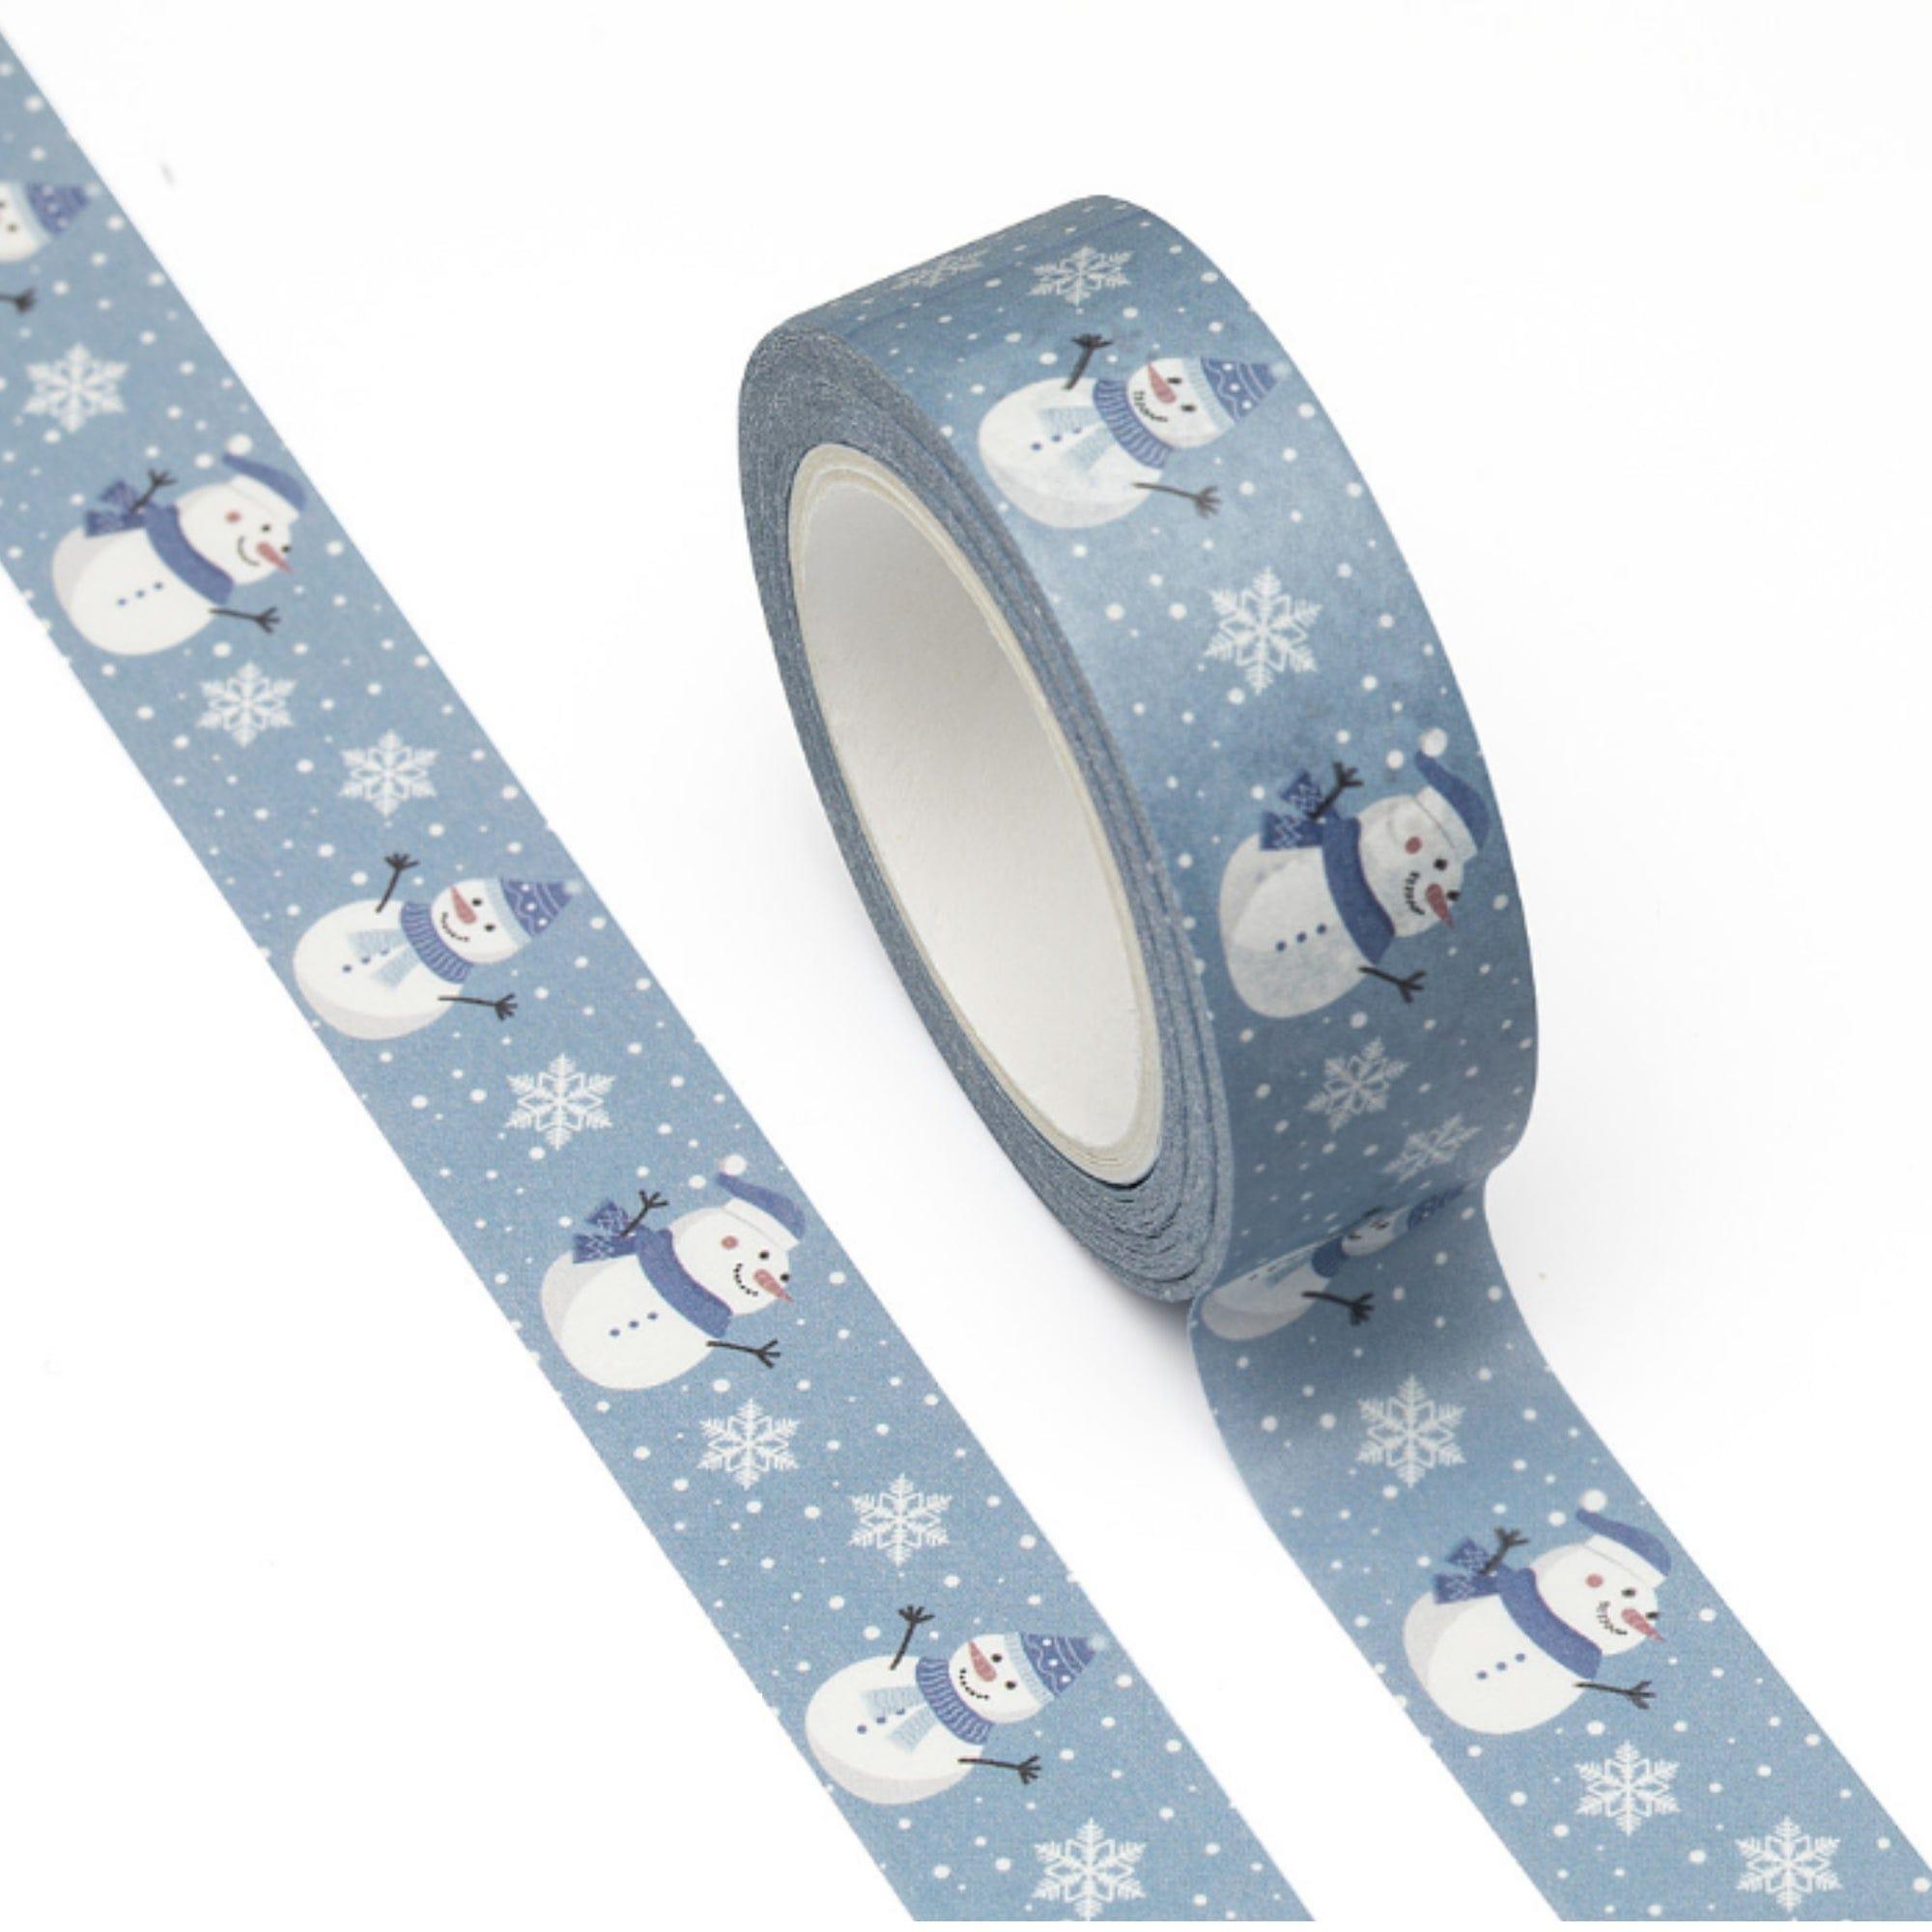 TW Collection Snowman & Snowflakes Washi Tape by SSC Designs - 15mm x 30 Feet